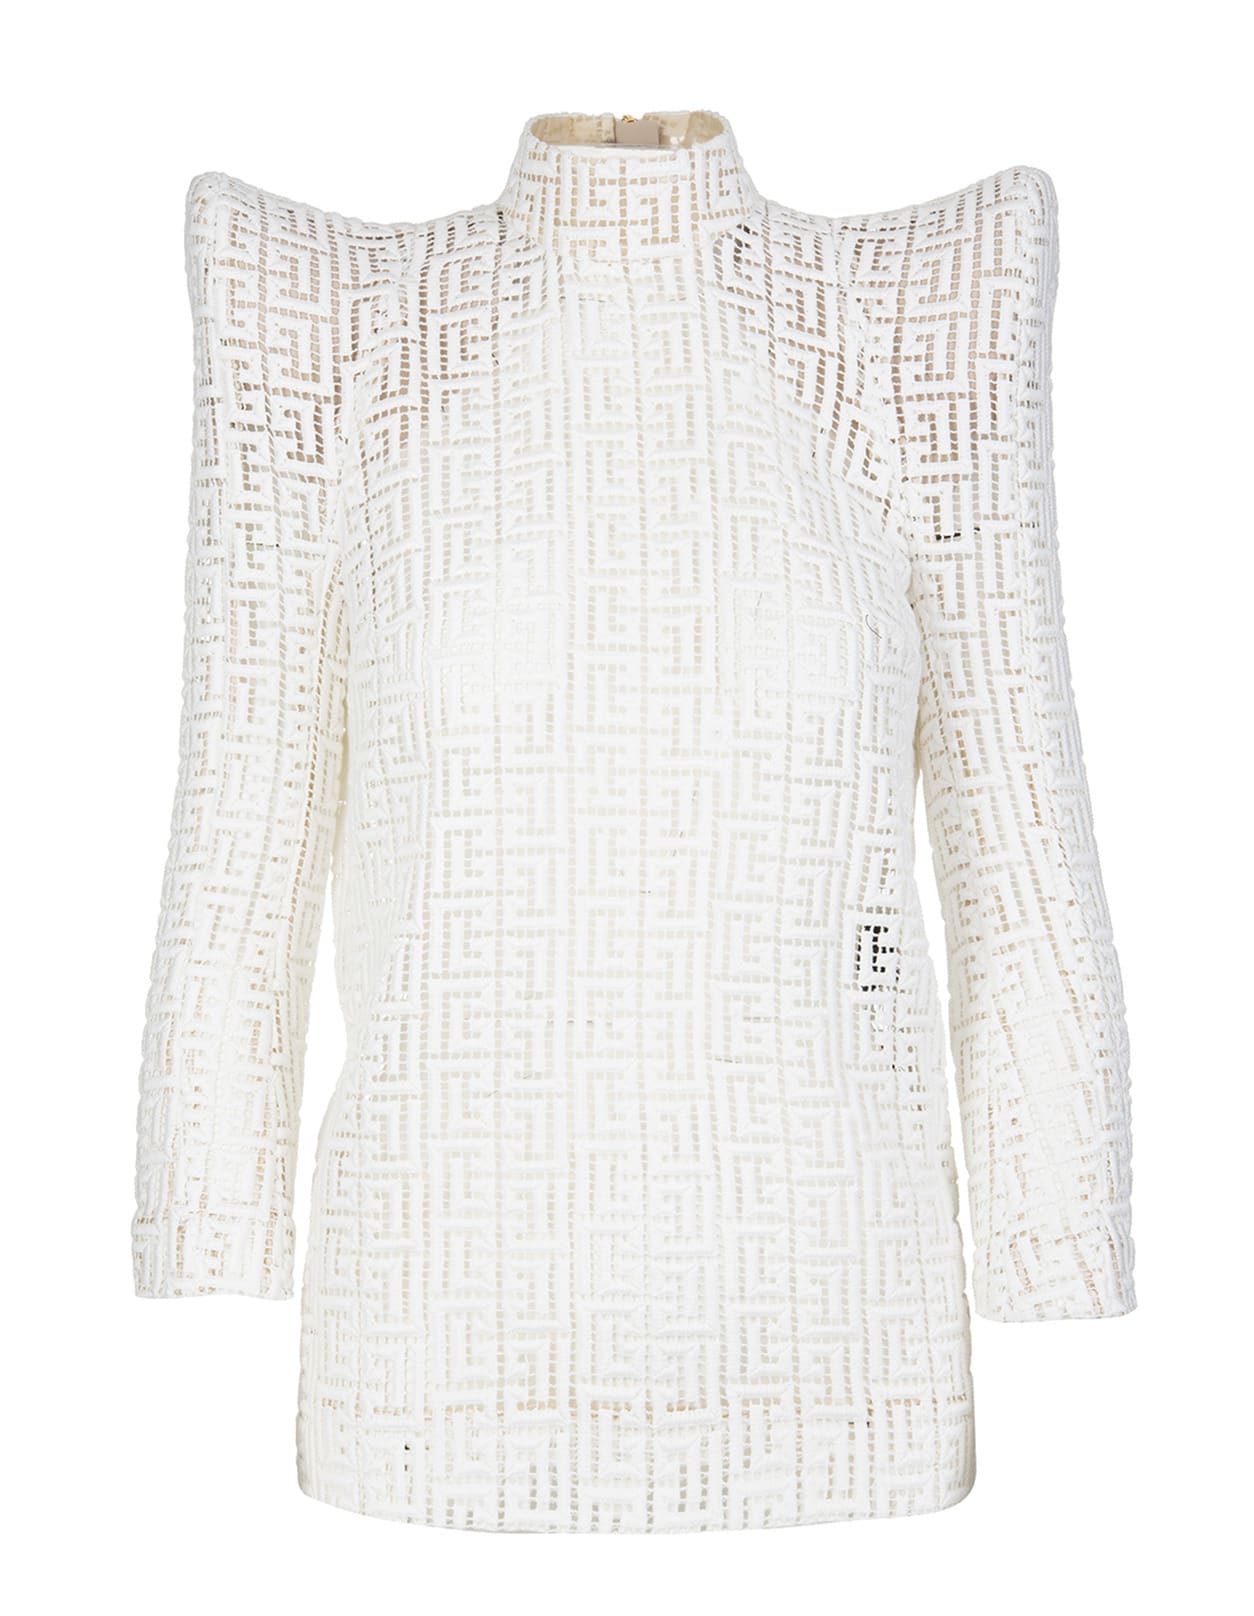 Balmain White Monogram Top With Structured Shoulders